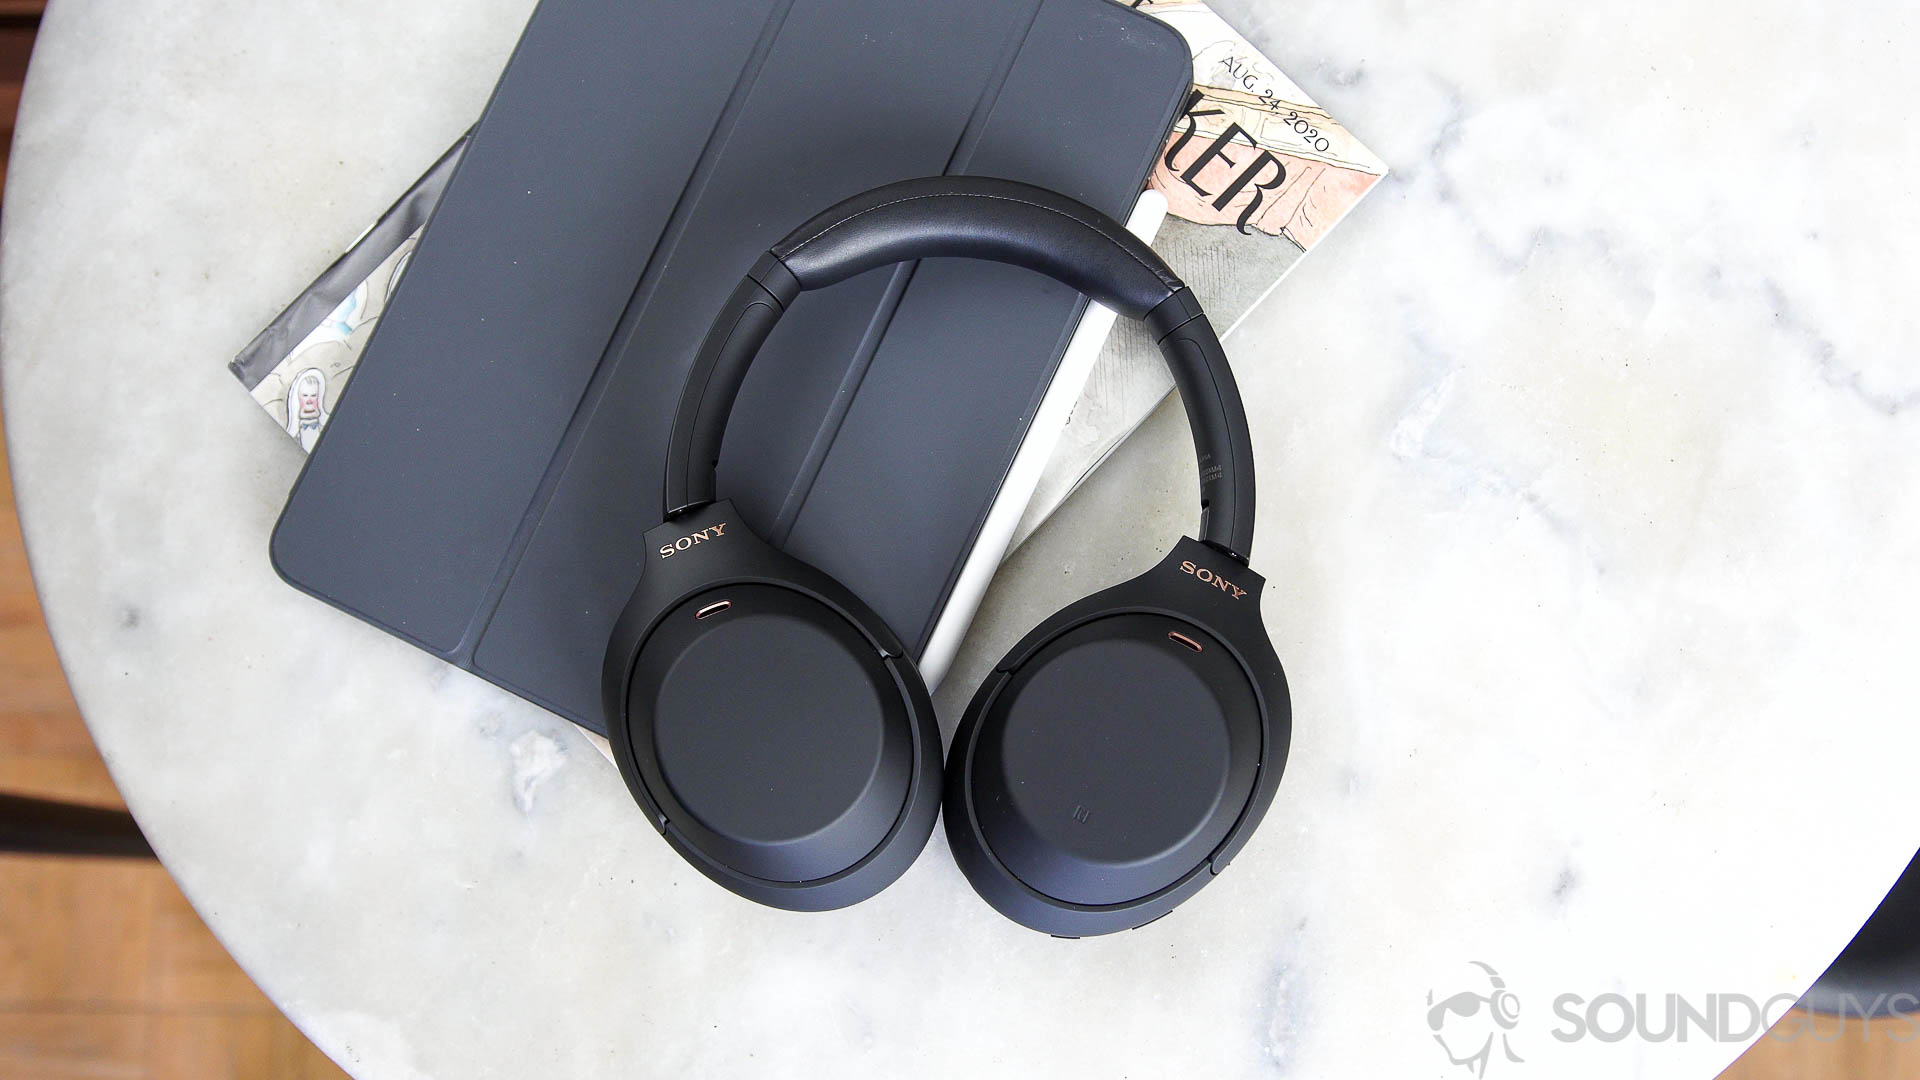 The Sony WH 1000XM4 noise cancelling headphones ipad